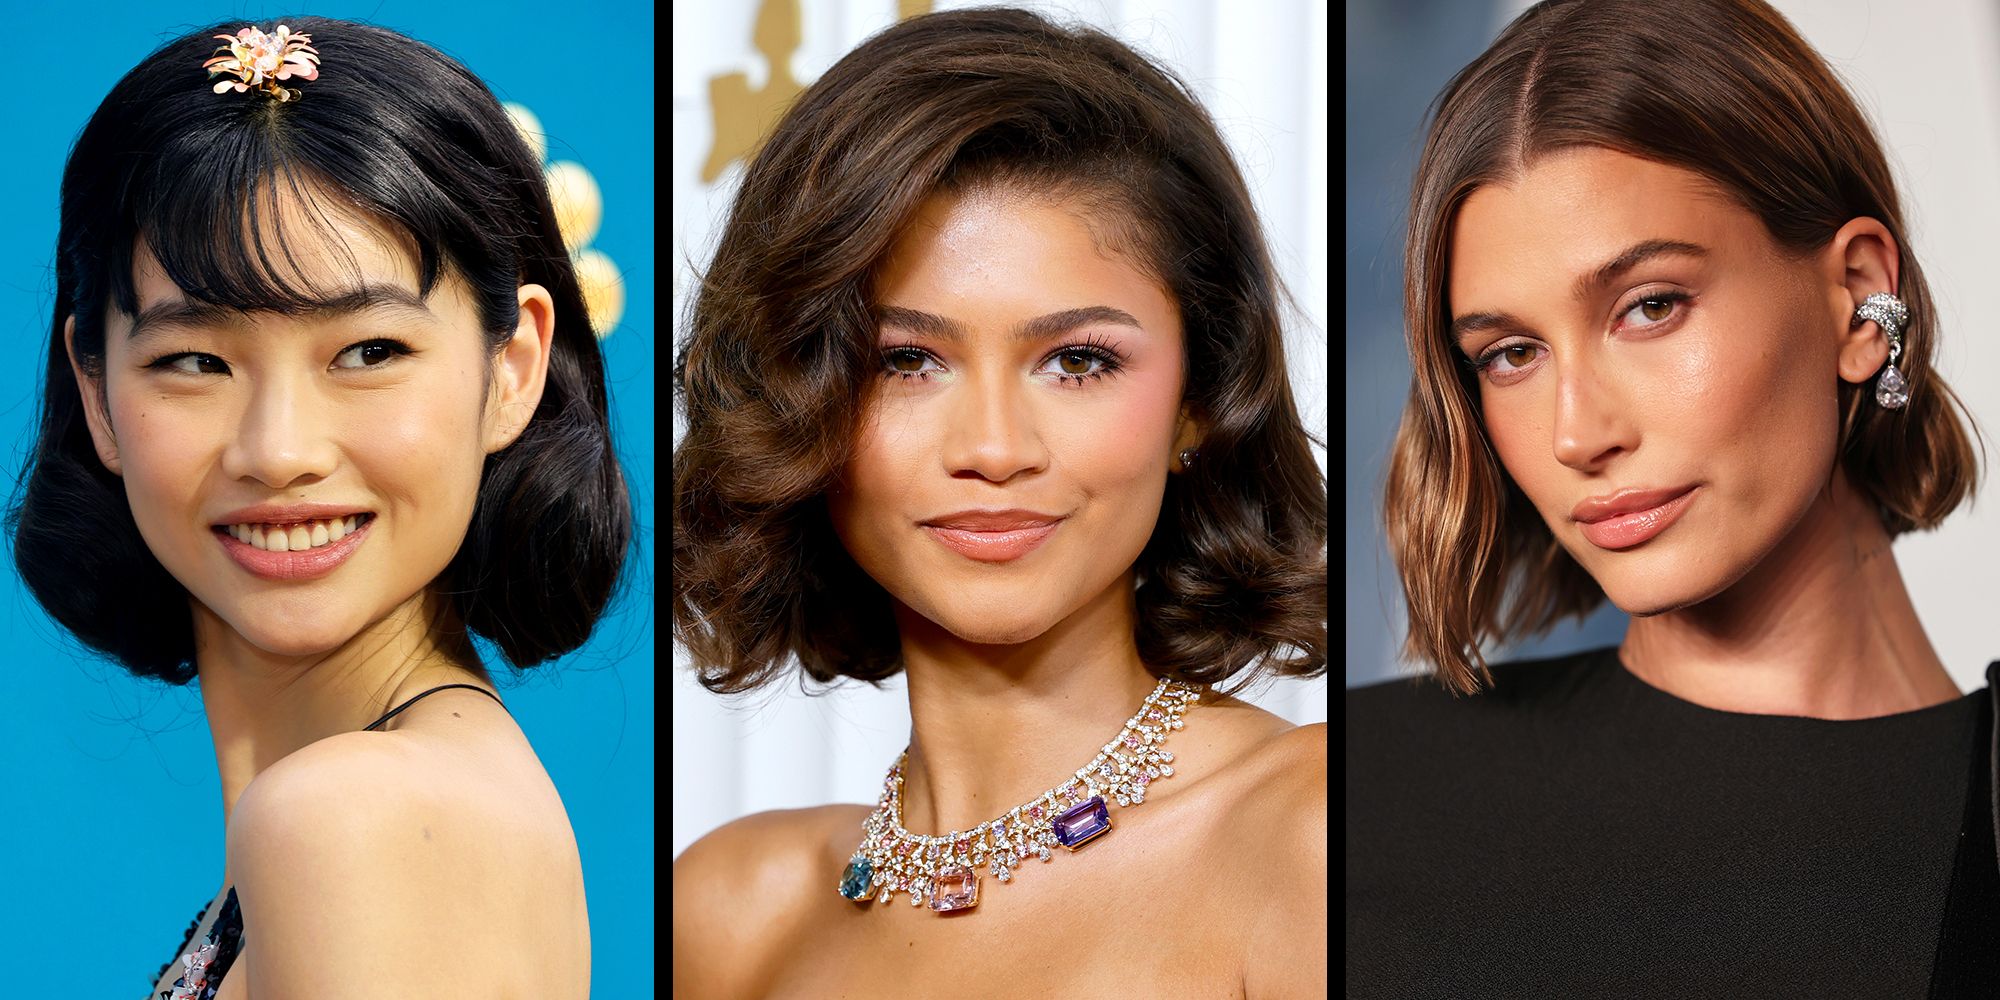 8 Easy Hairstyles that Make You Look Younger